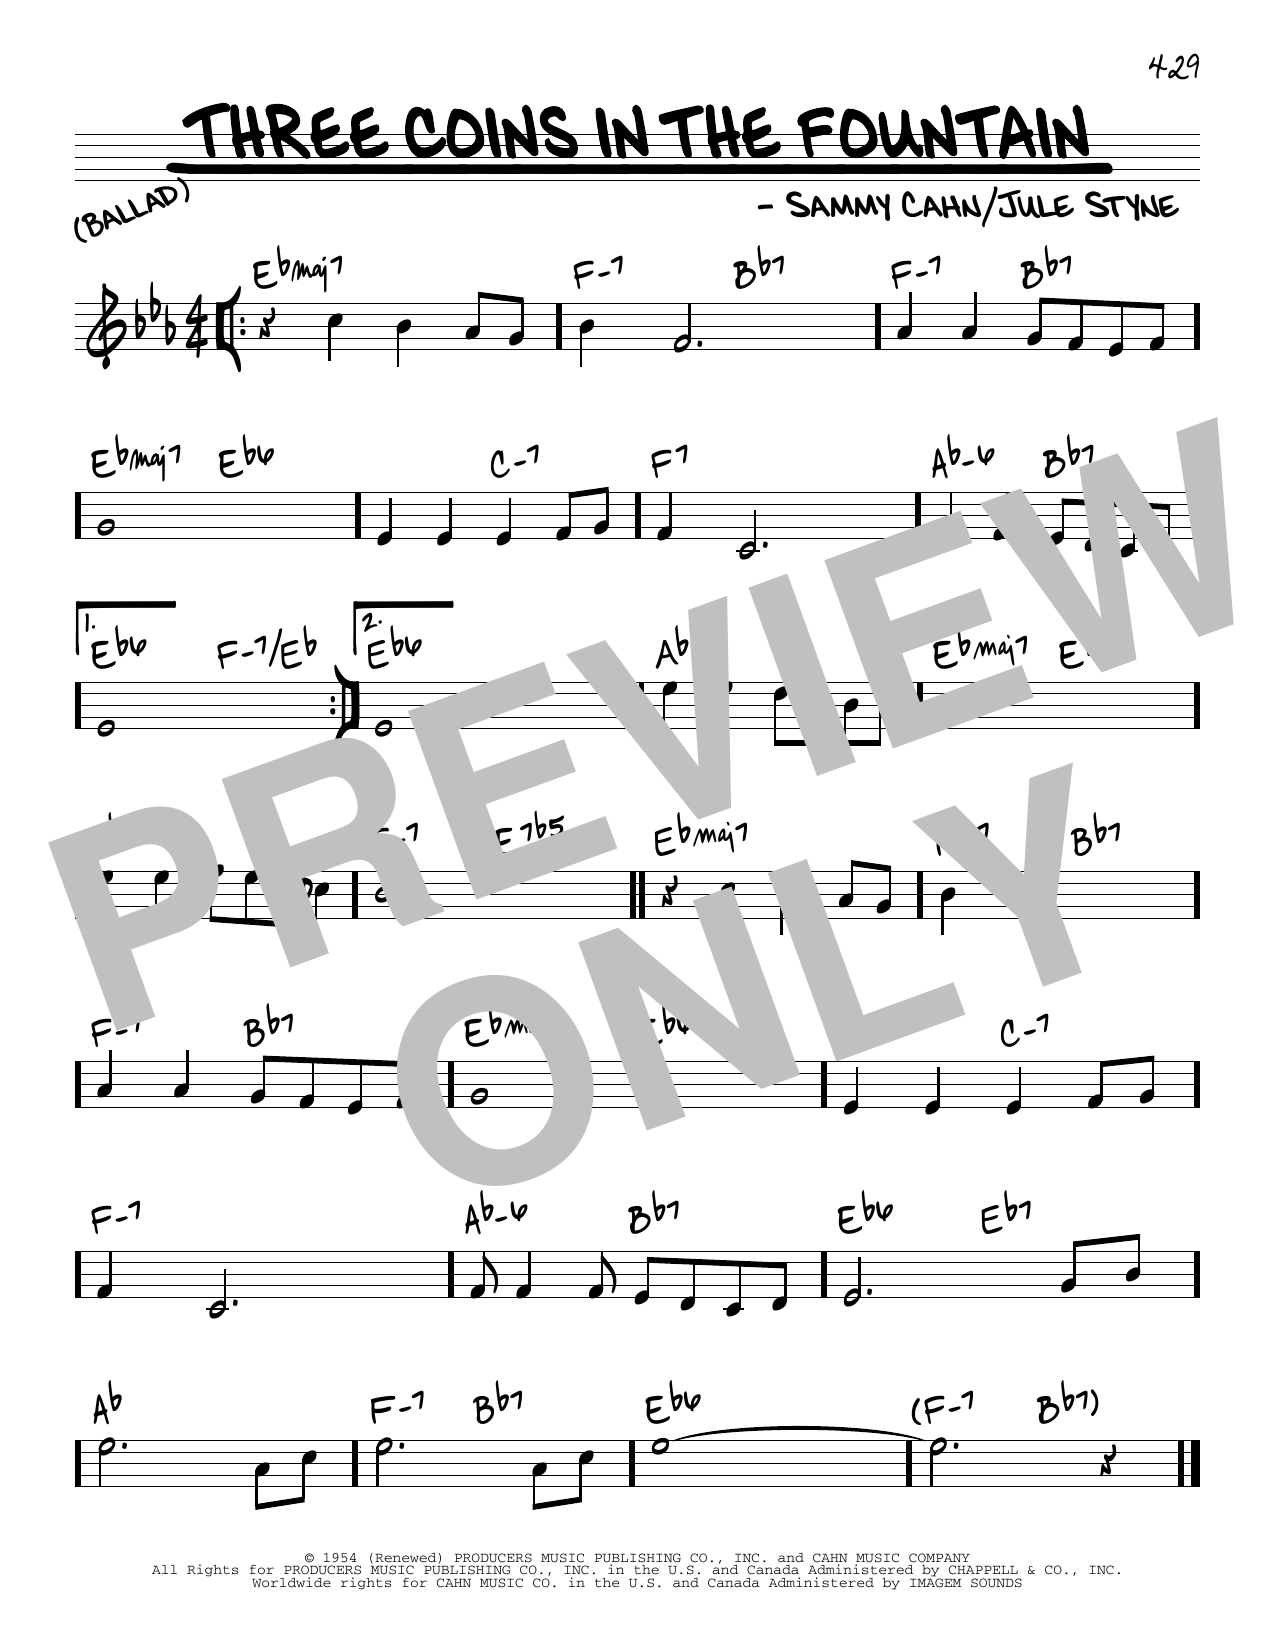 Download The Four Aces Three Coins In The Fountain Sheet Music